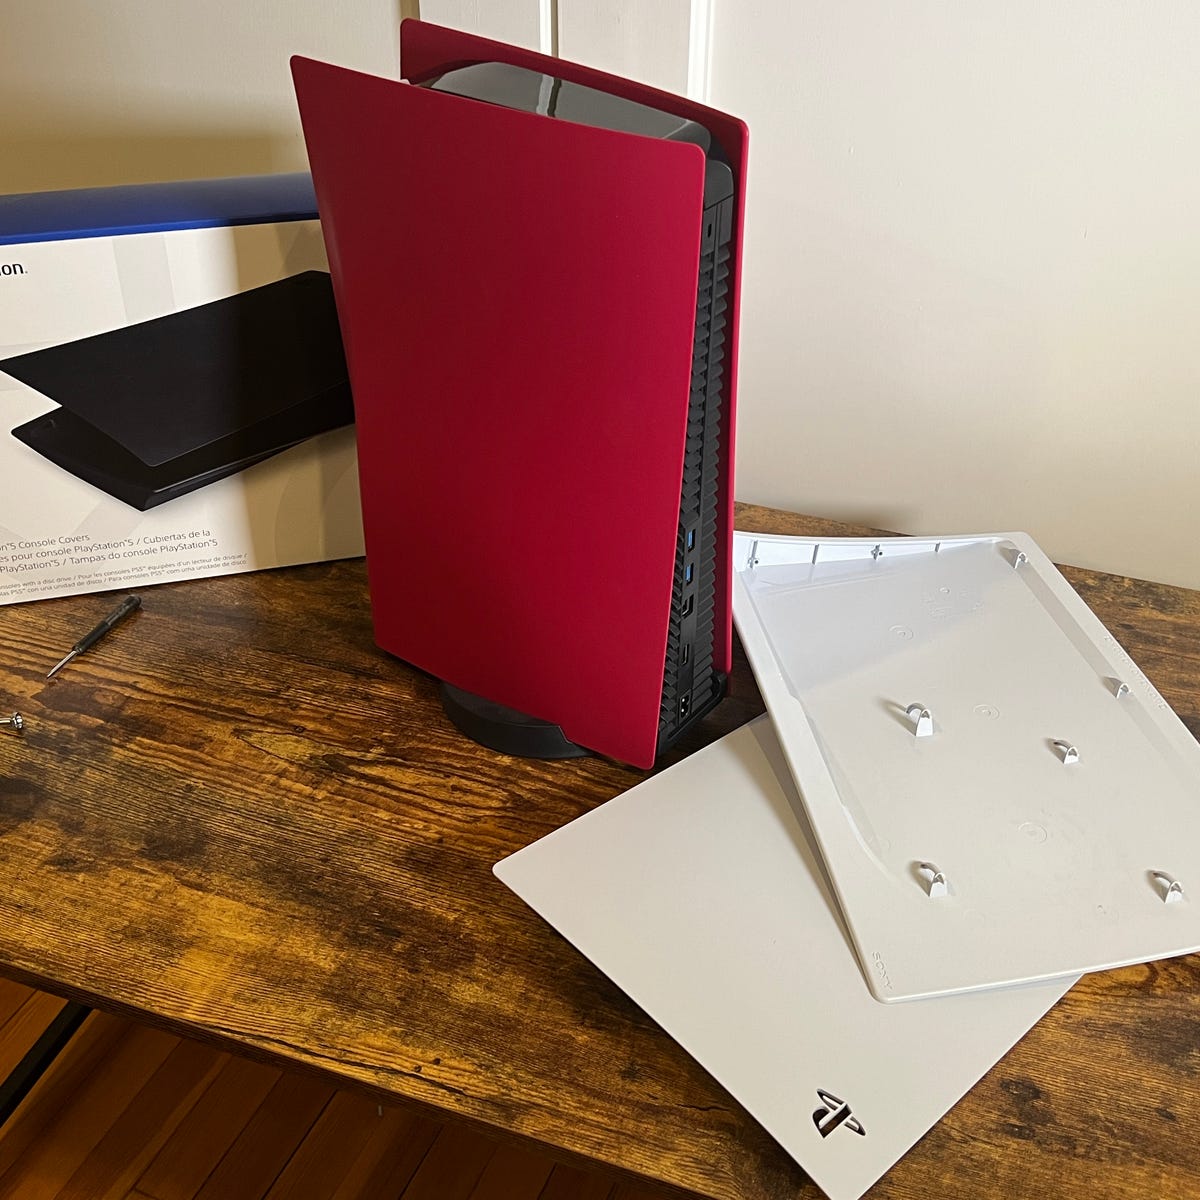 Sony's snap-on PS5 covers reviewed: Adds a splash of console color - CNET